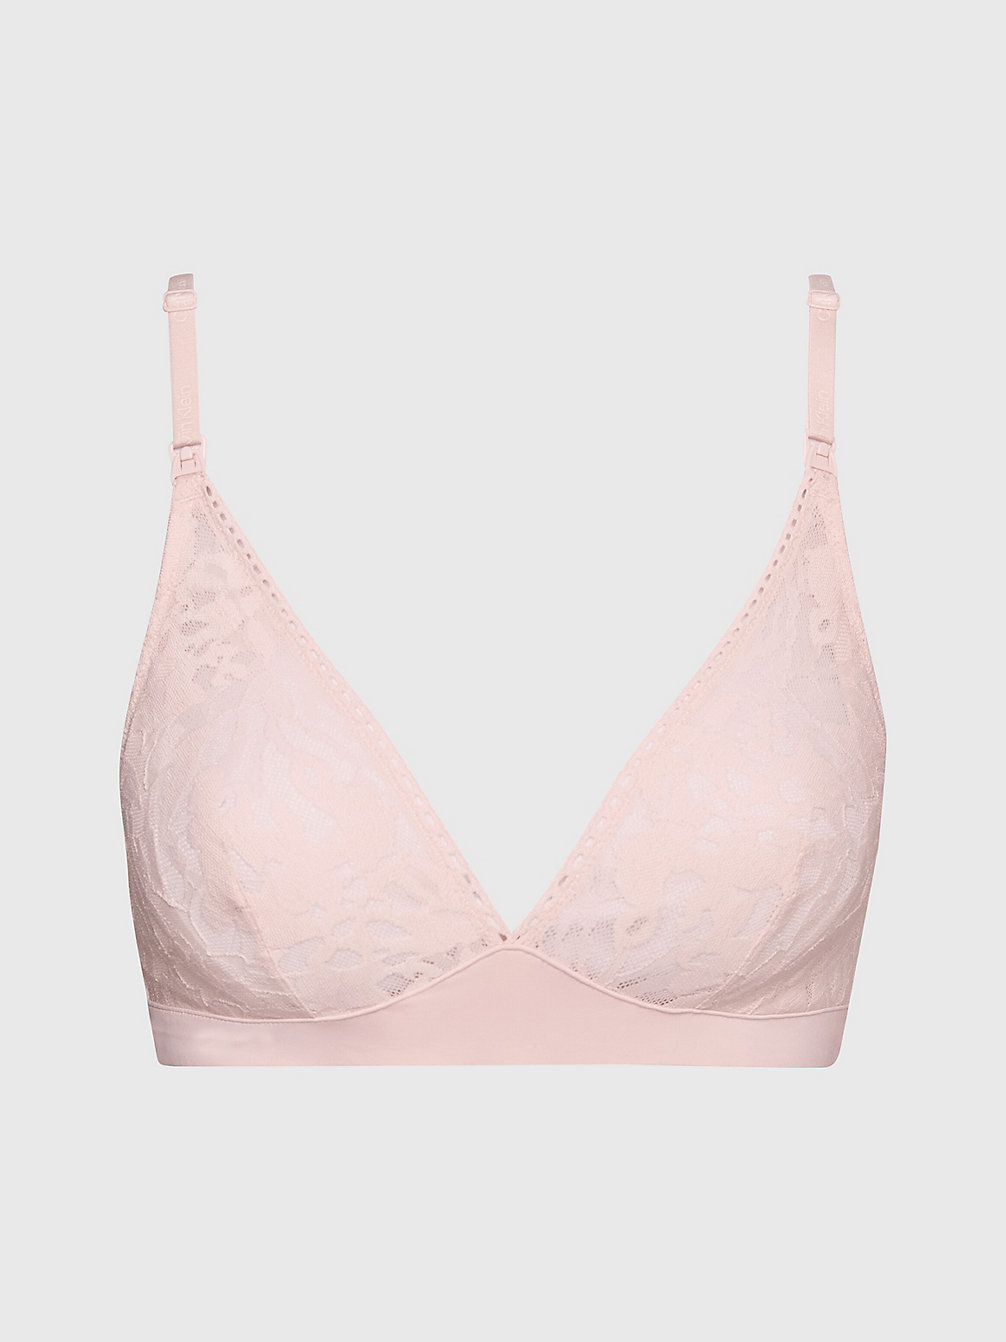 NYMPTHÂ€™S THIGH Maternity Bralette - Ultra Soft Lace undefined women Calvin Klein